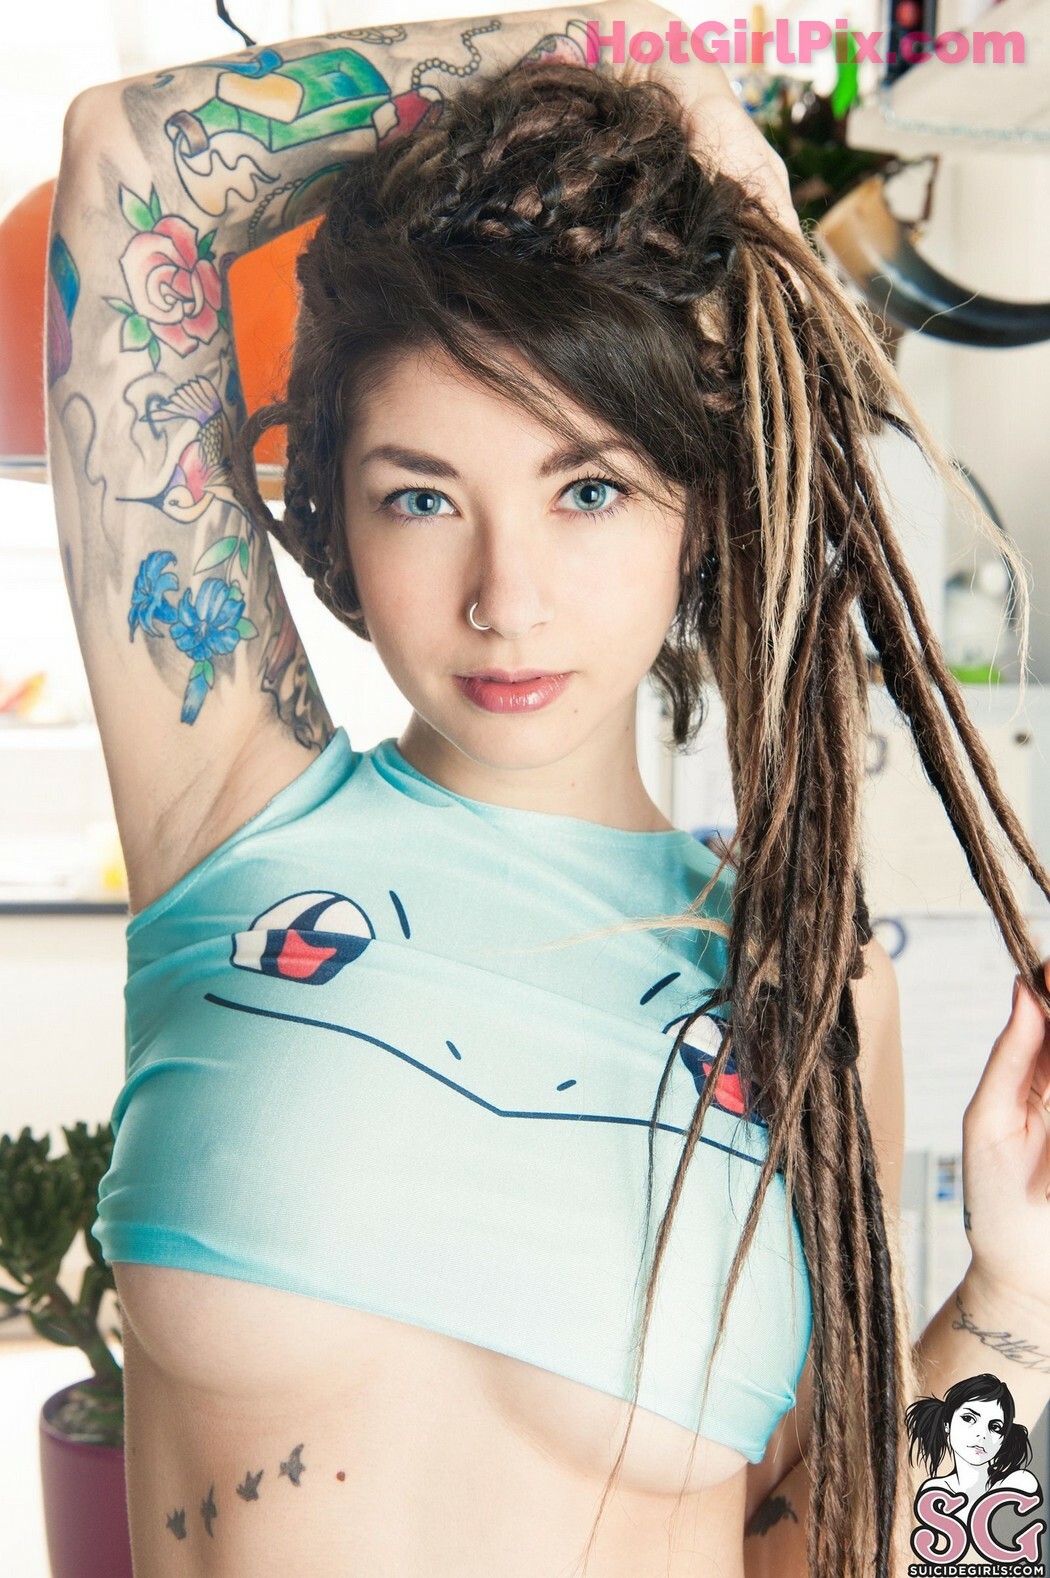 [Suicide Girls] Alerosebunny - A Wild Squirtle Appears